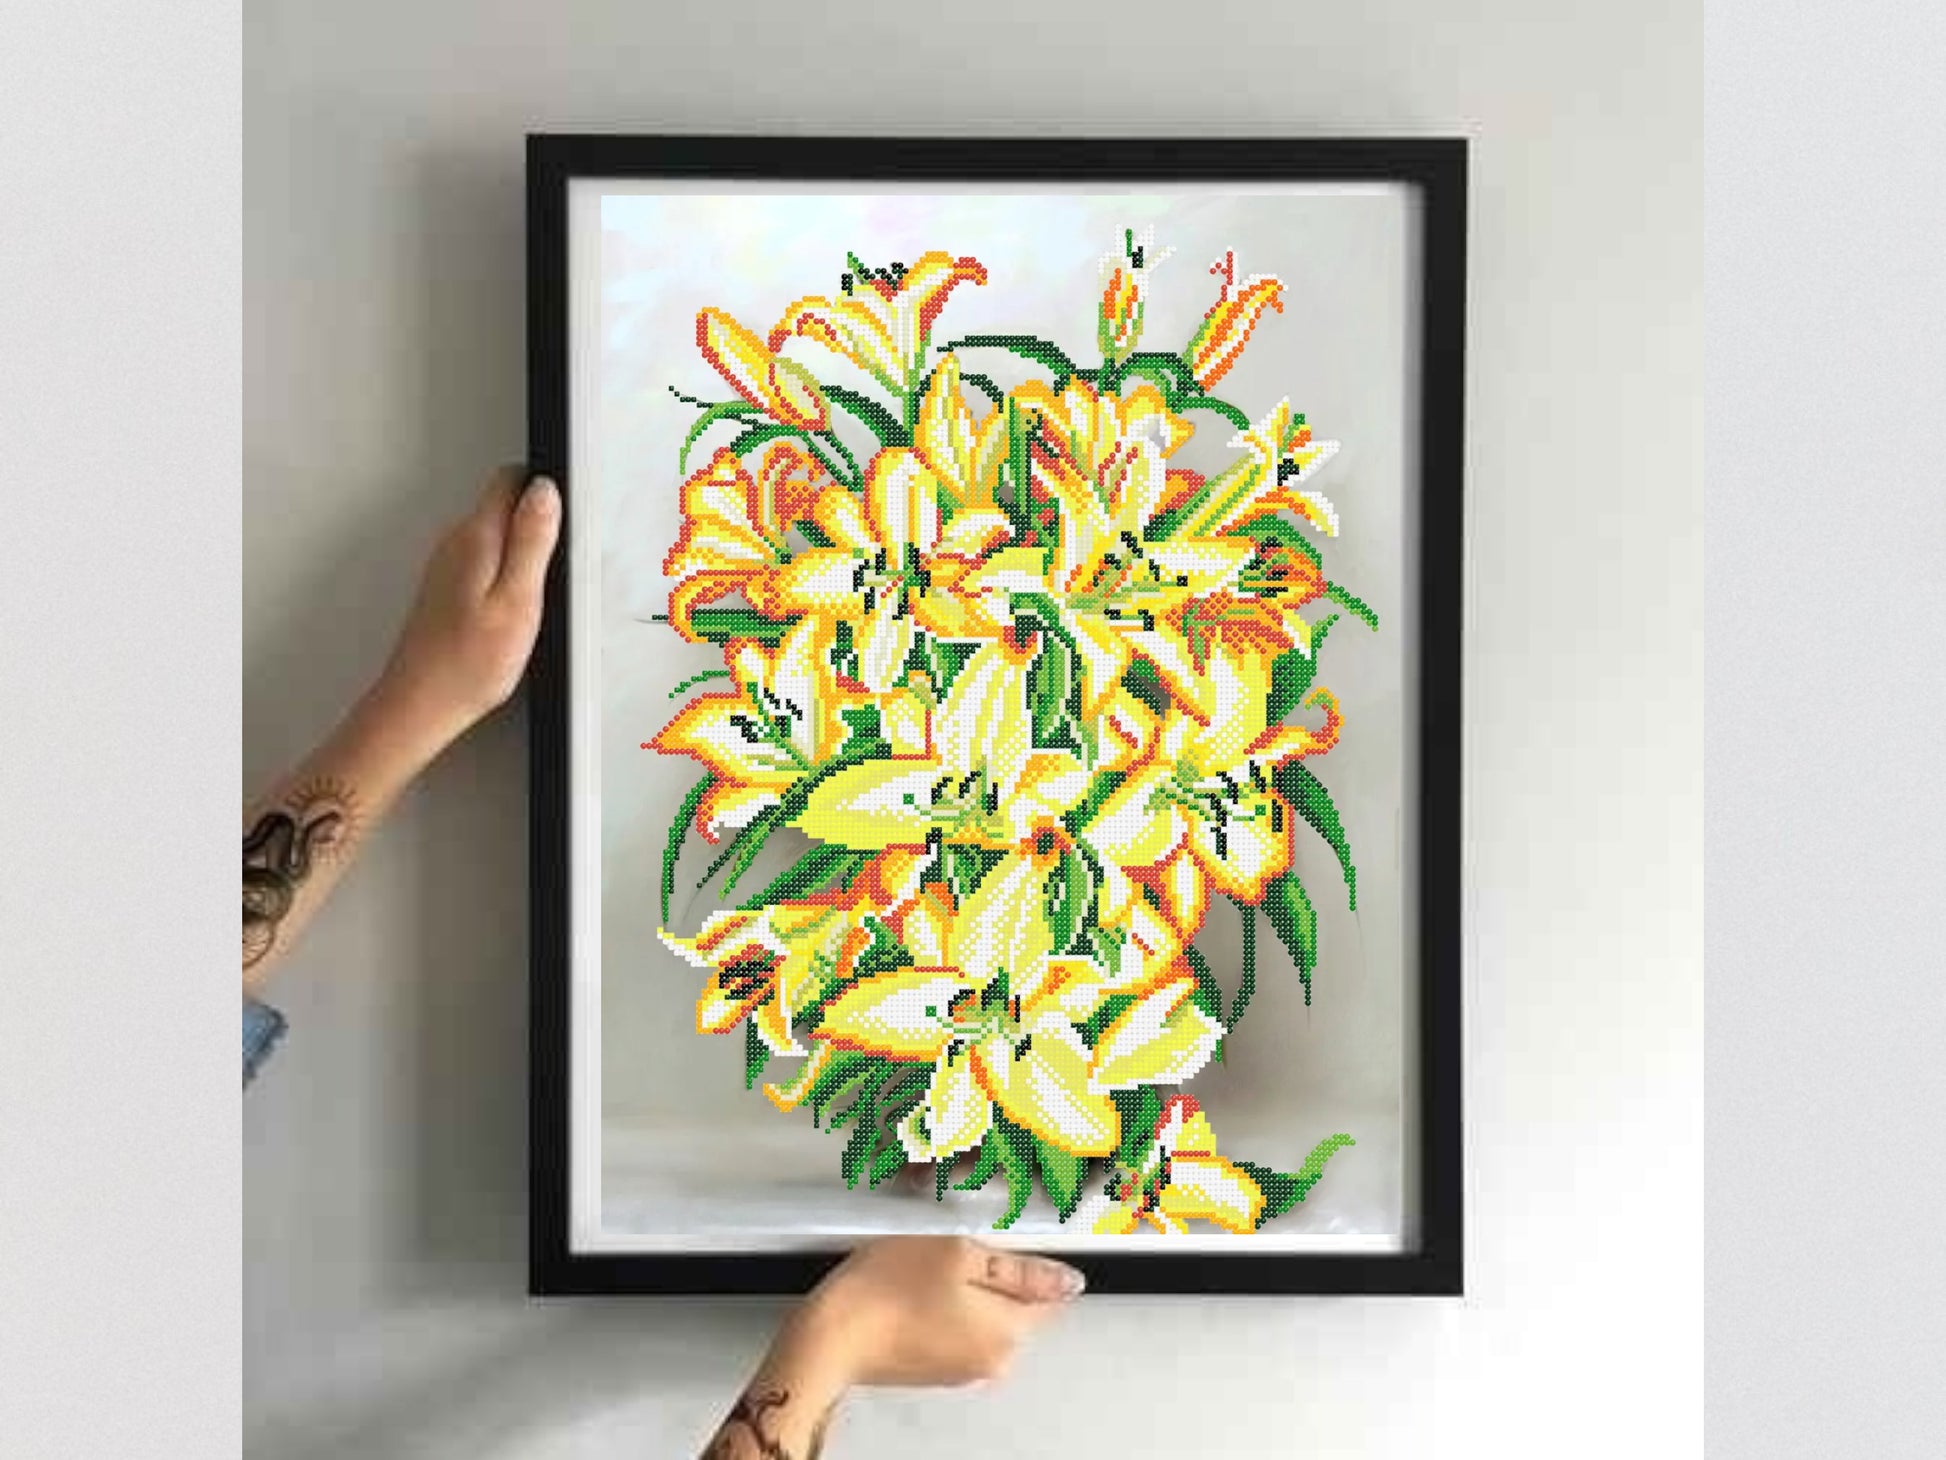 DIY Bead embroidery kit  "Yellow lilies". - VadymShop